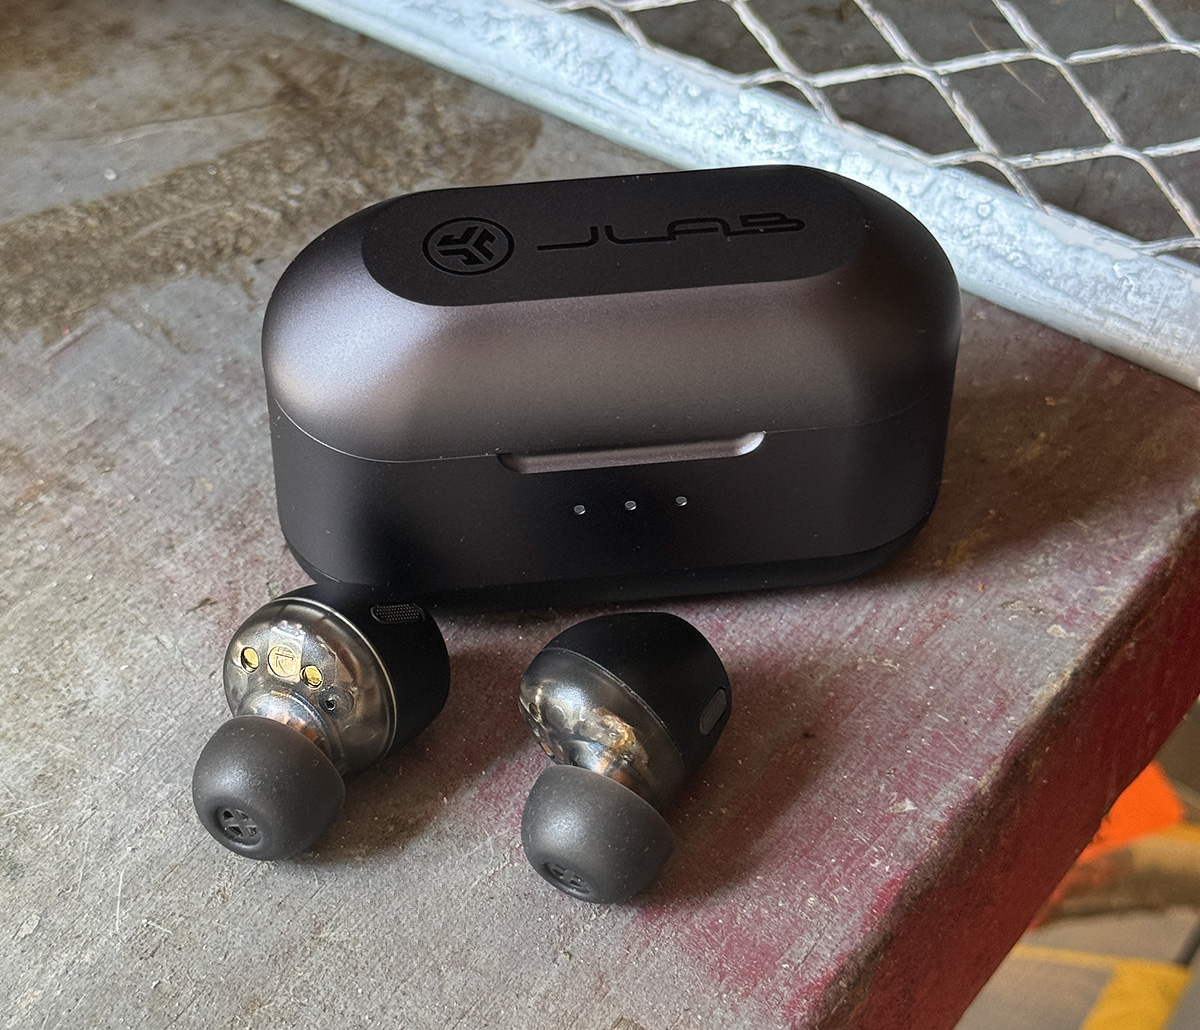 JLab Epic Lab Edition Earbuds review – a step up for JLab